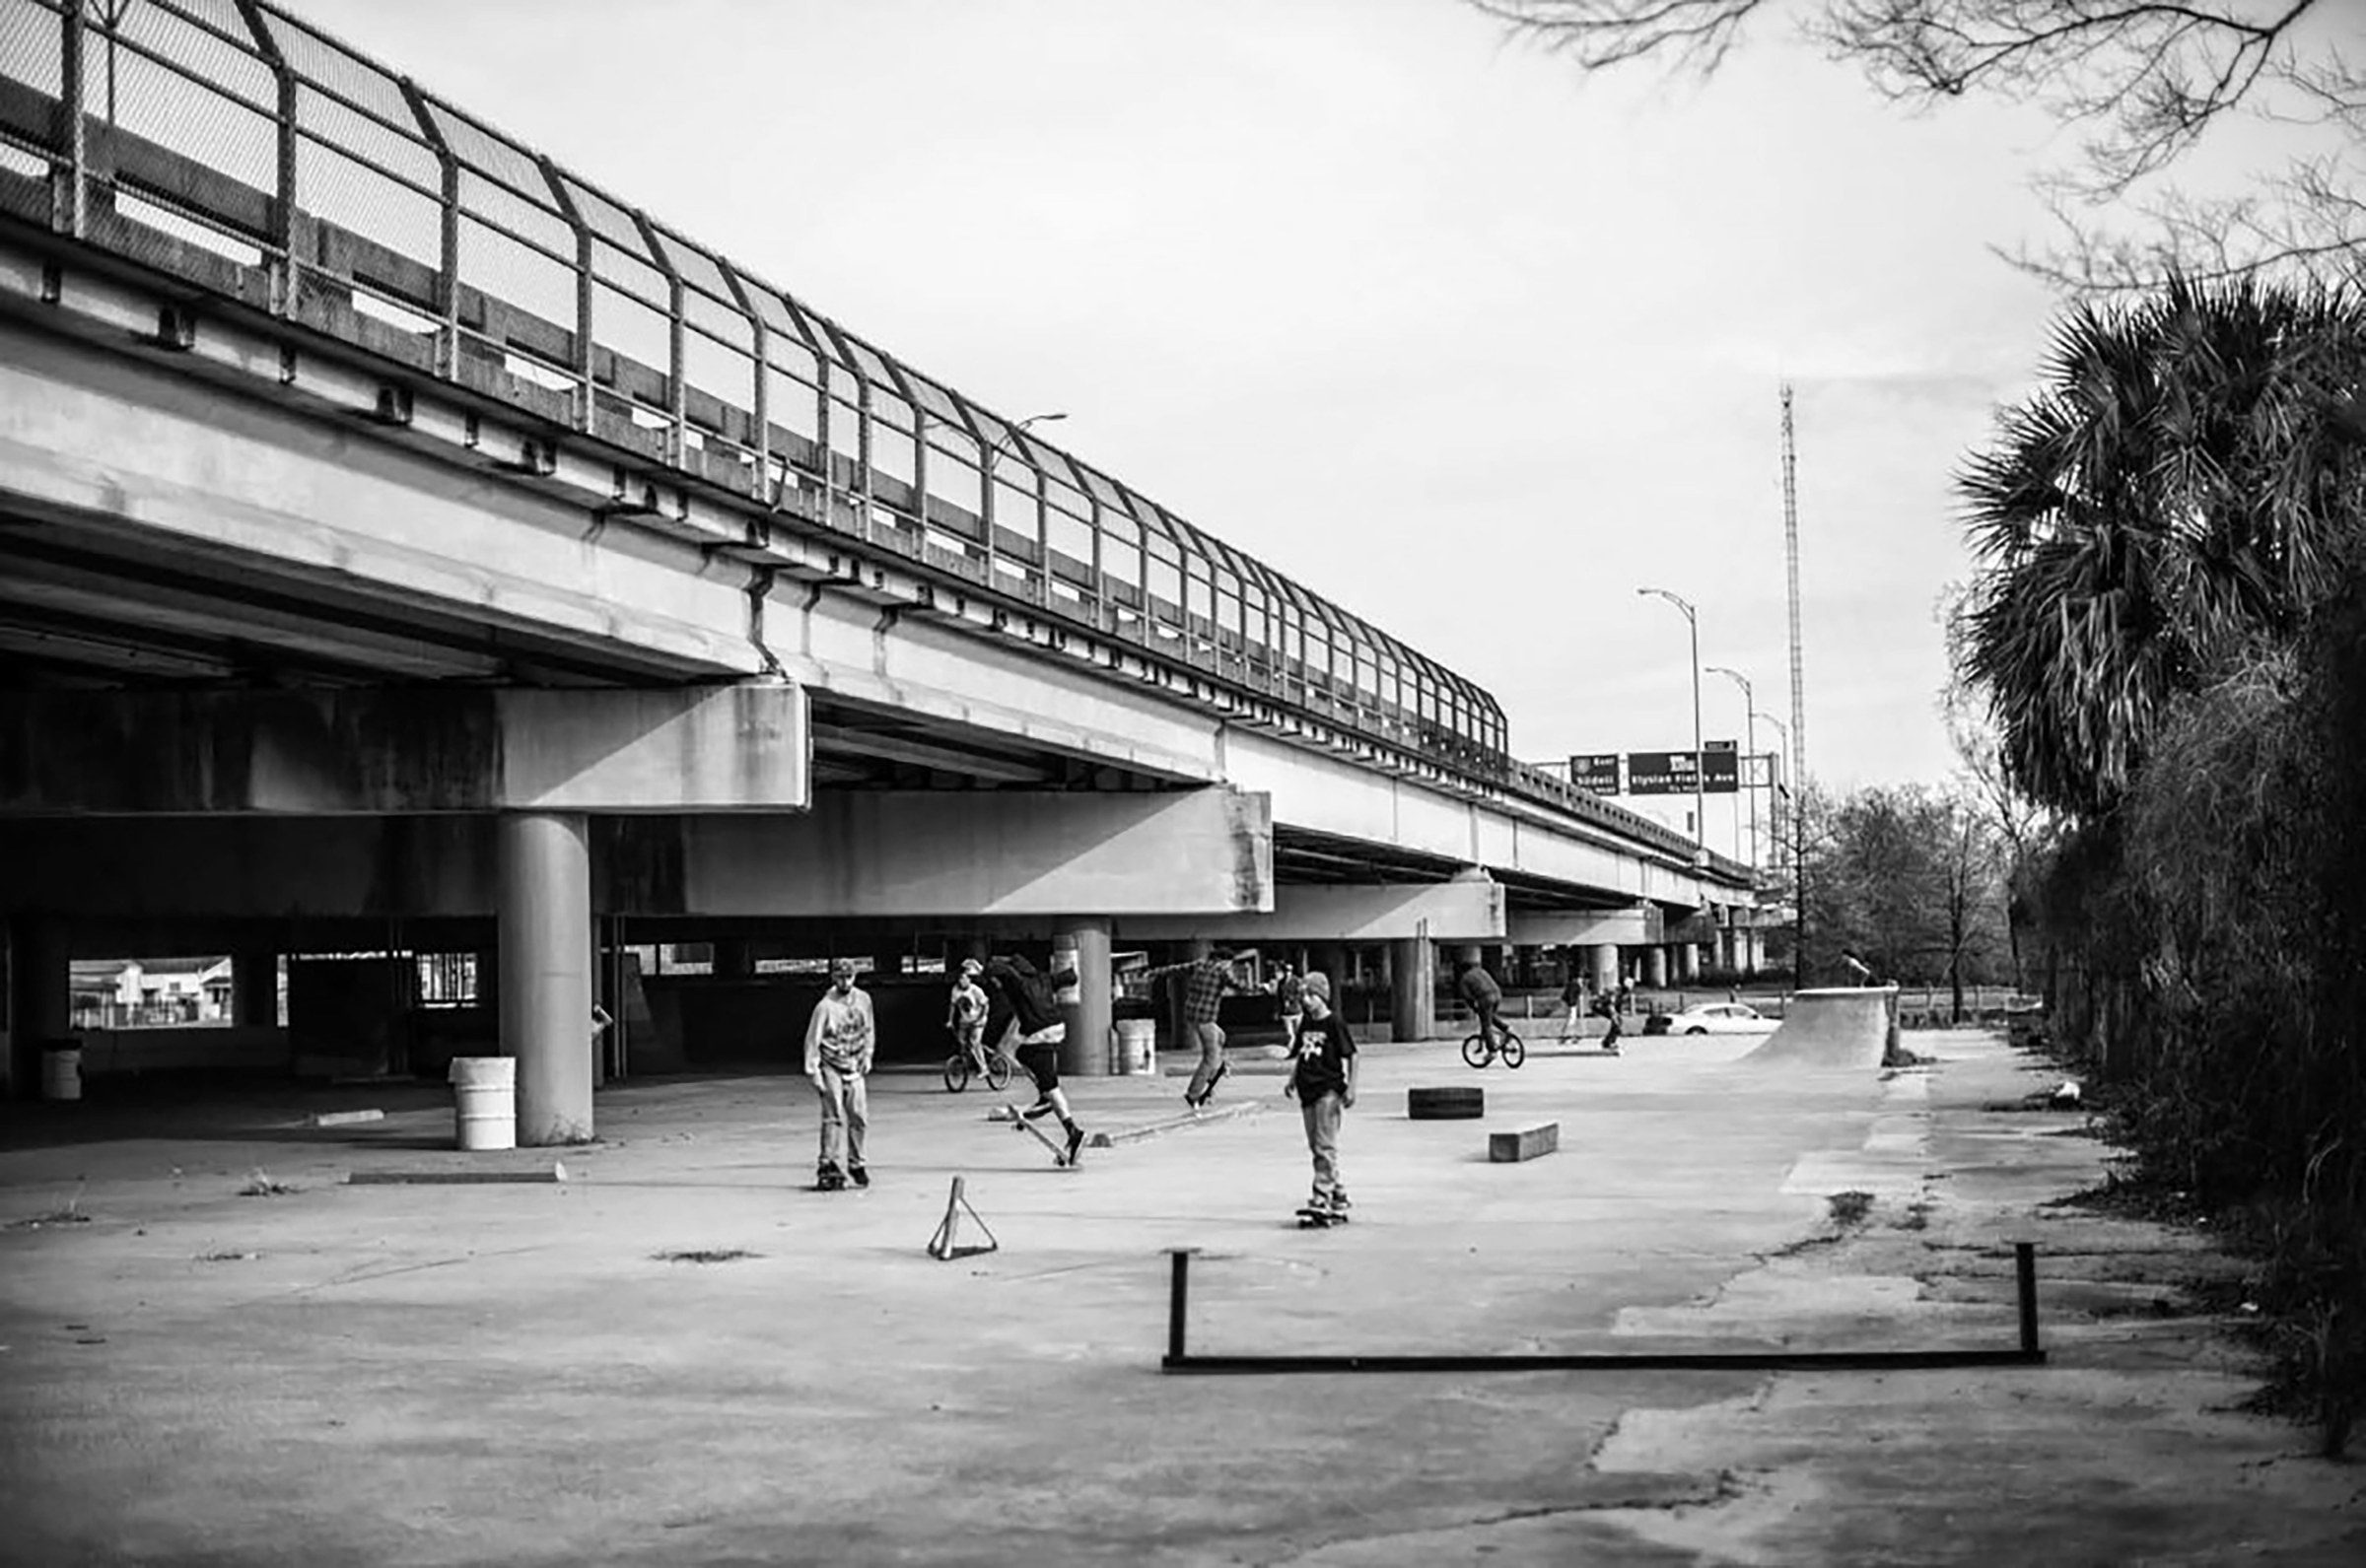 Black and white photo of group of people skateboarding under an overpass